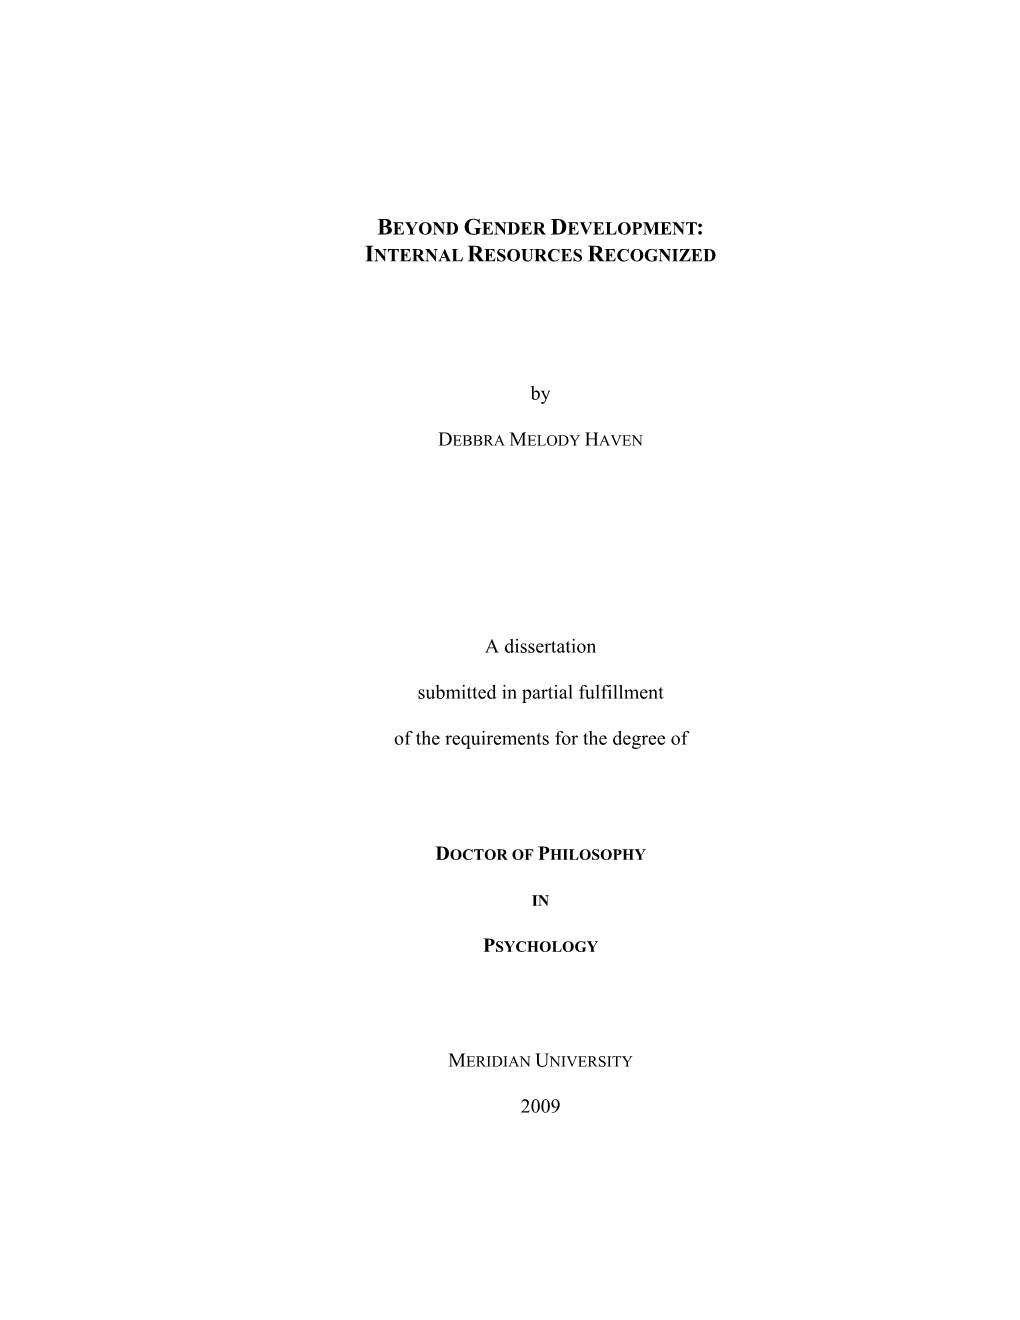 By a Dissertation Submitted in Partial Fulfillment of the Requirements For